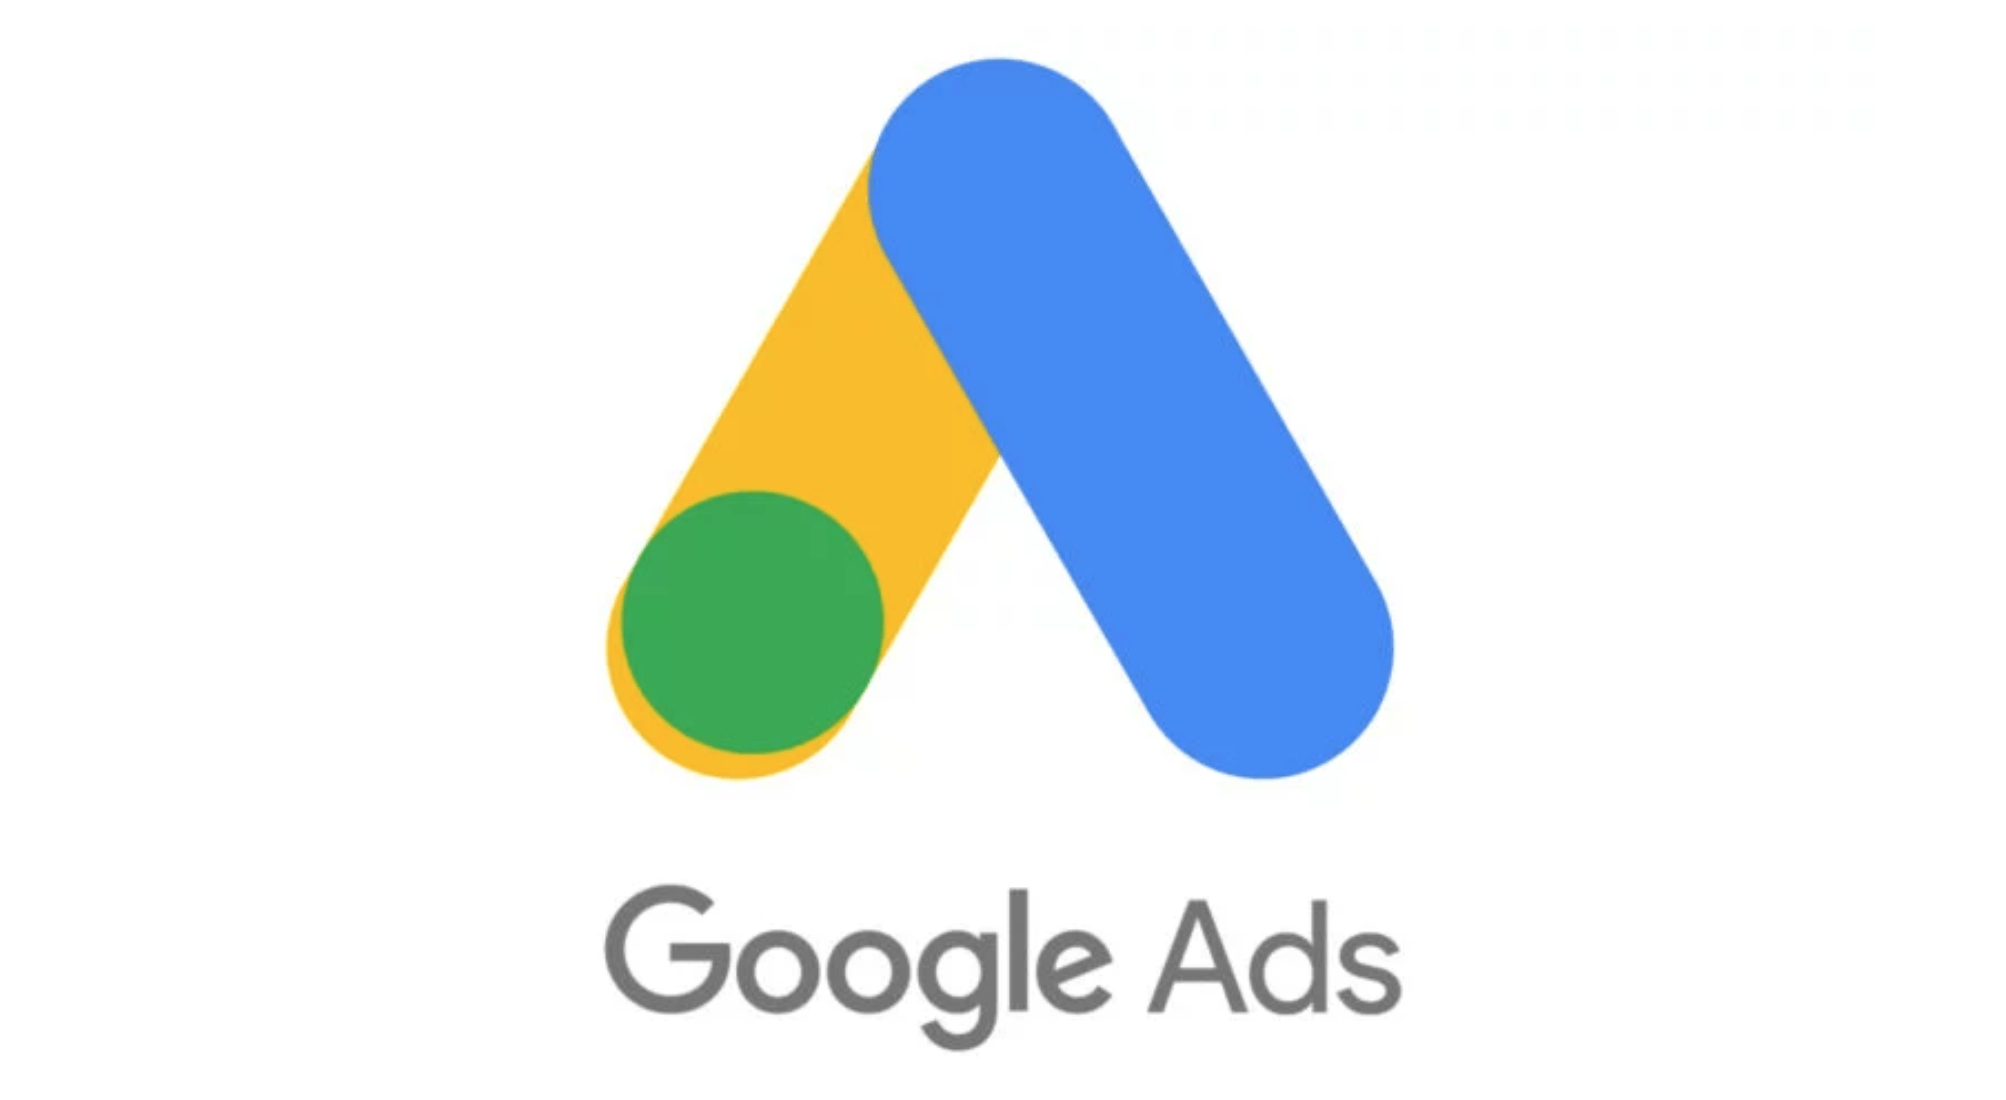 Google AdWords Logo - Google is re-branding Adwords to Google Ads. Why ? | Technology News